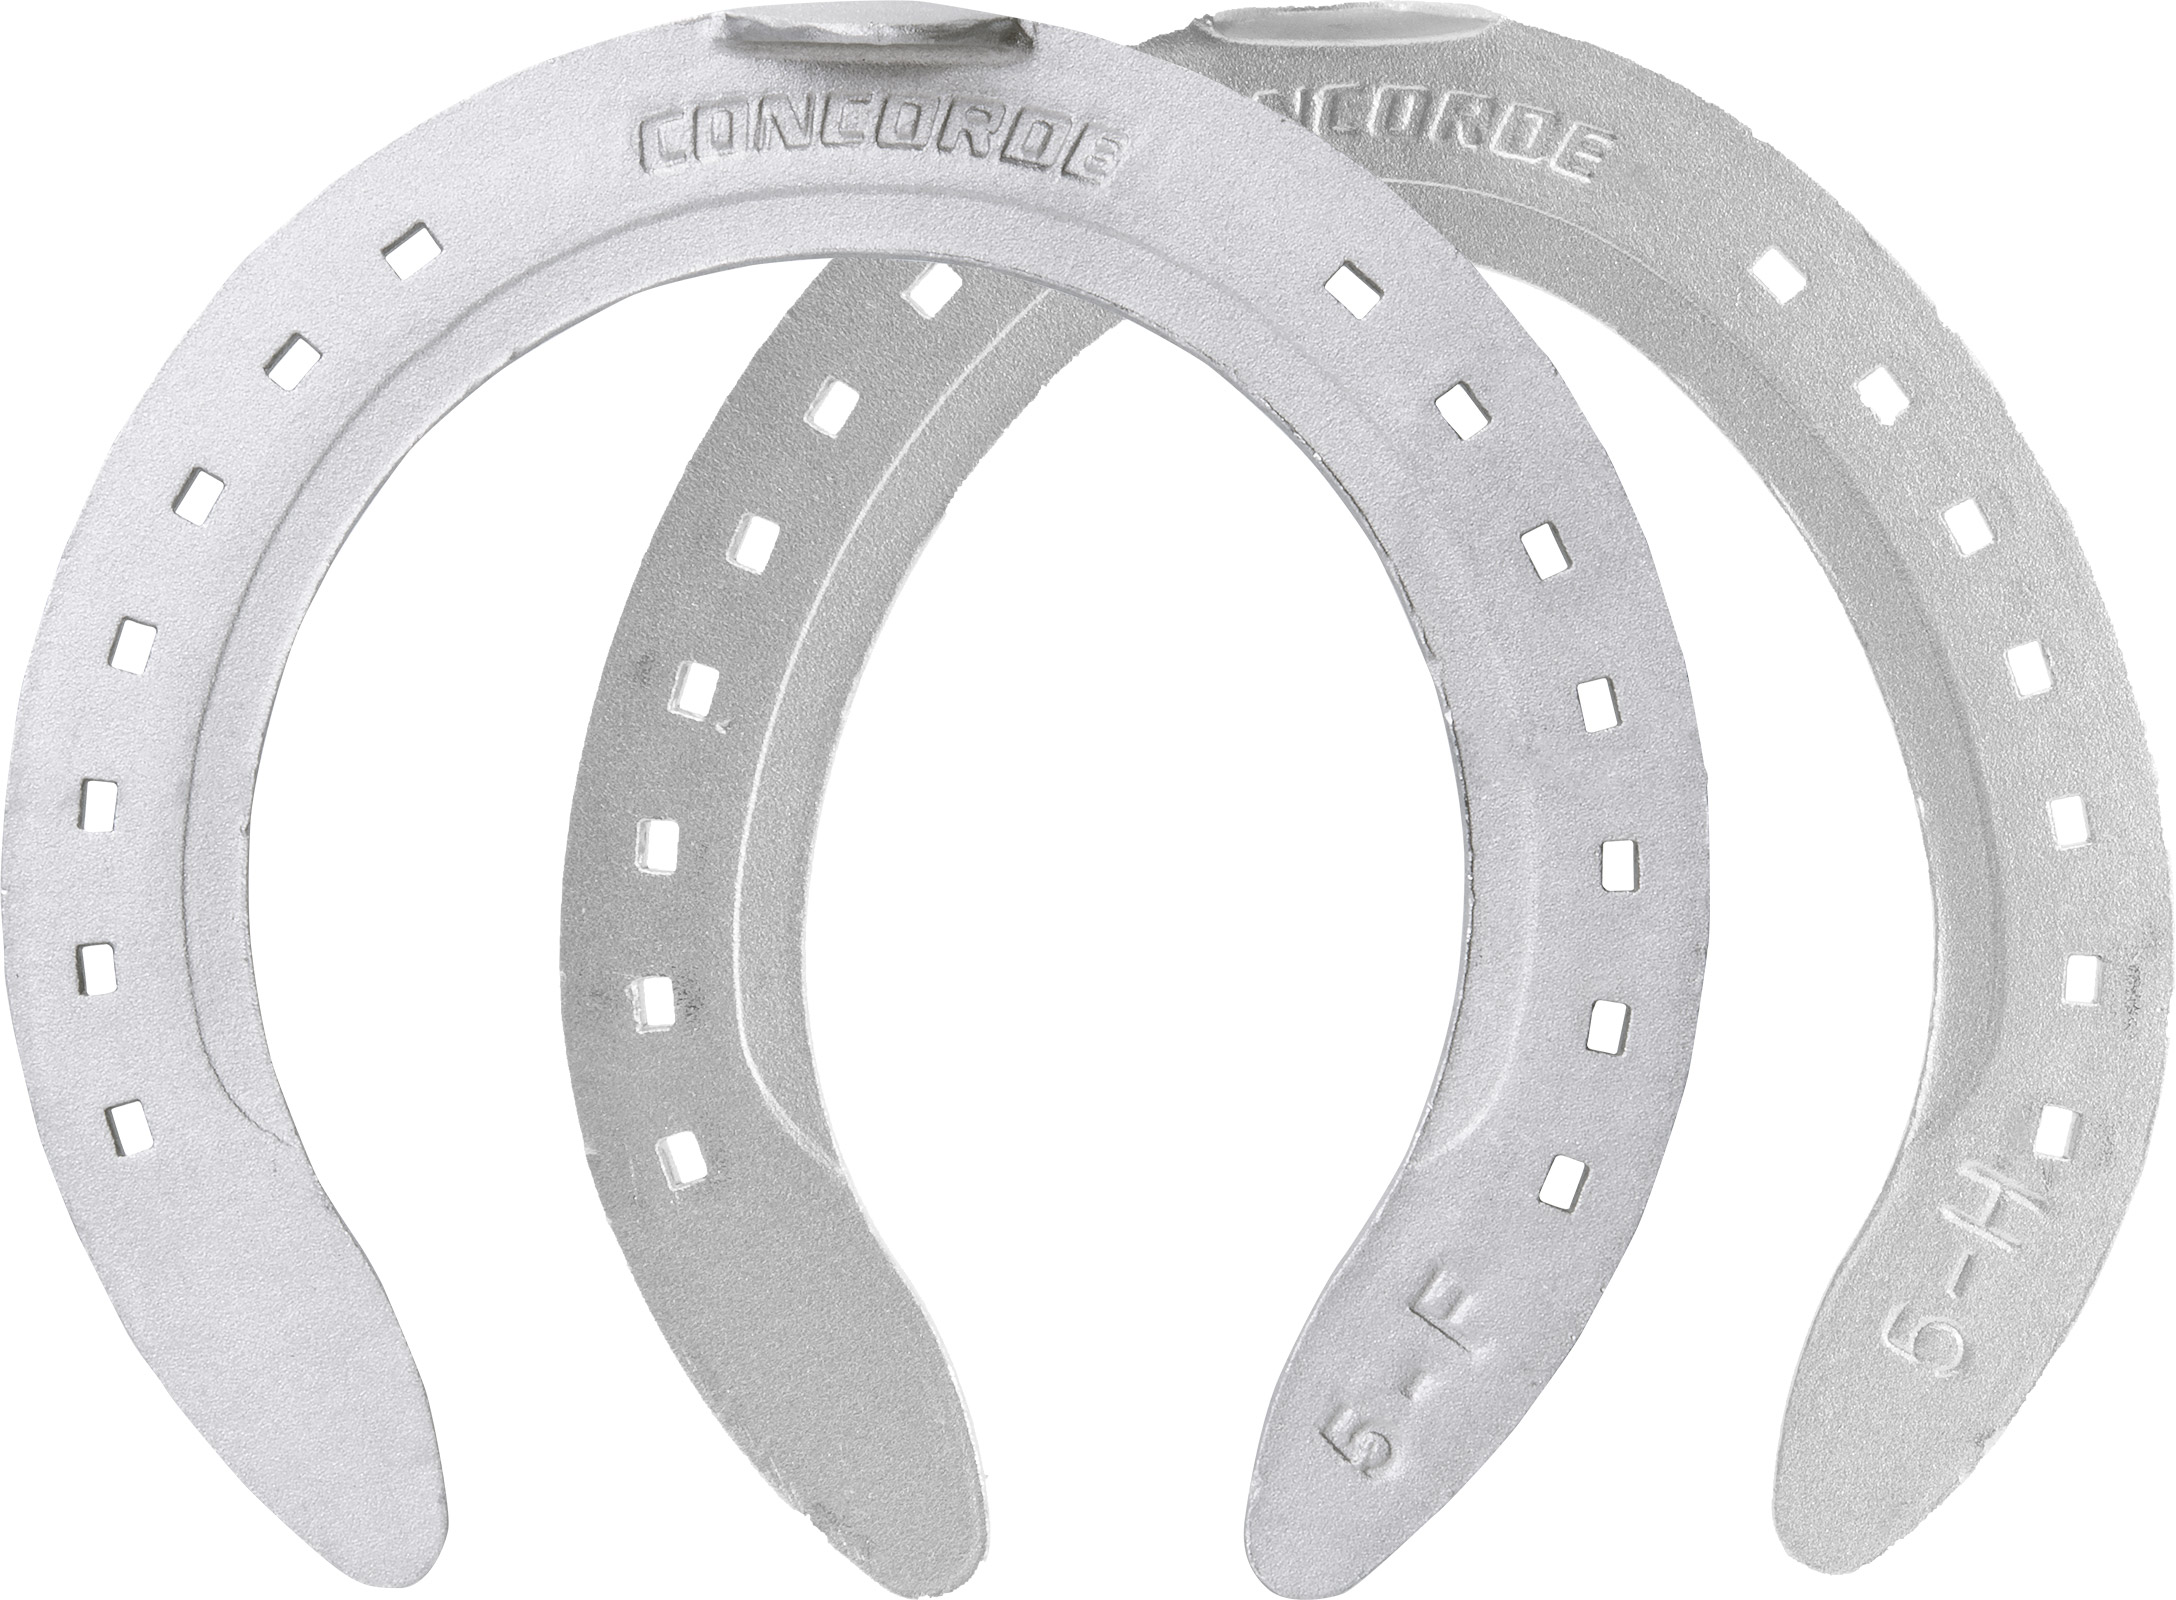 St. Croix Concorde Aluminum Turf Plate horseshoes, front and hind, hoof side view